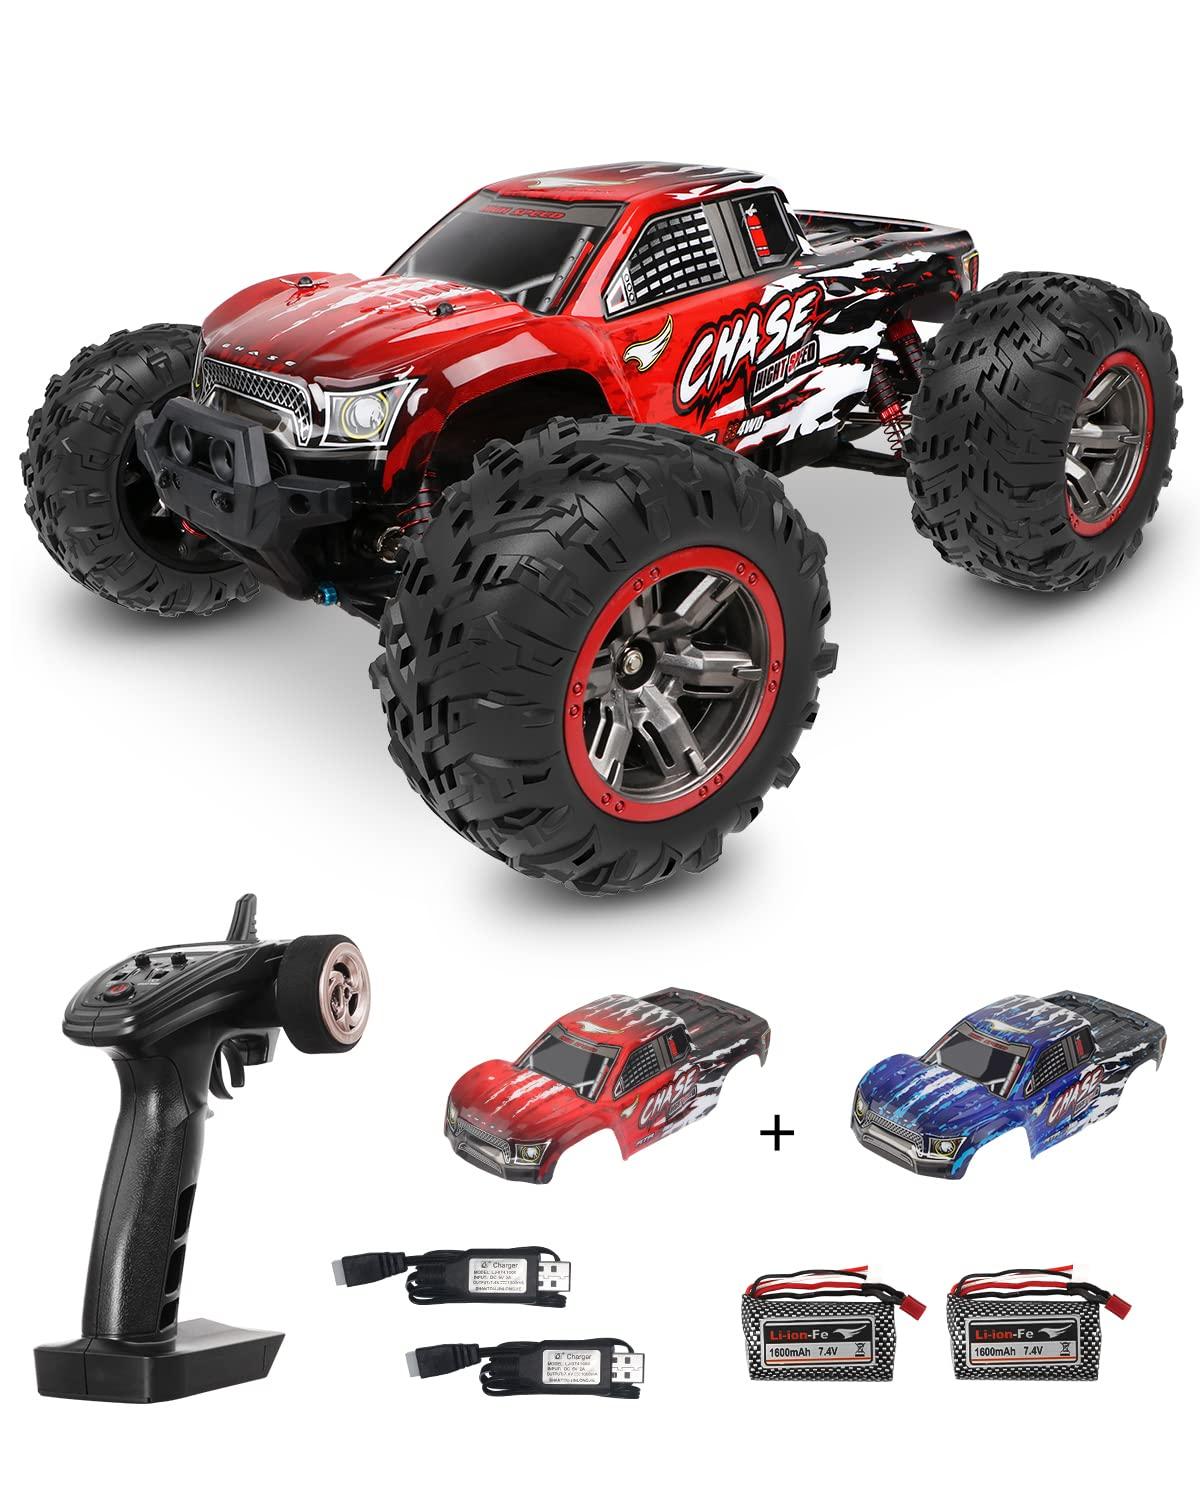 Big Rc Cars:  Leading brands and websites for big RC cars 